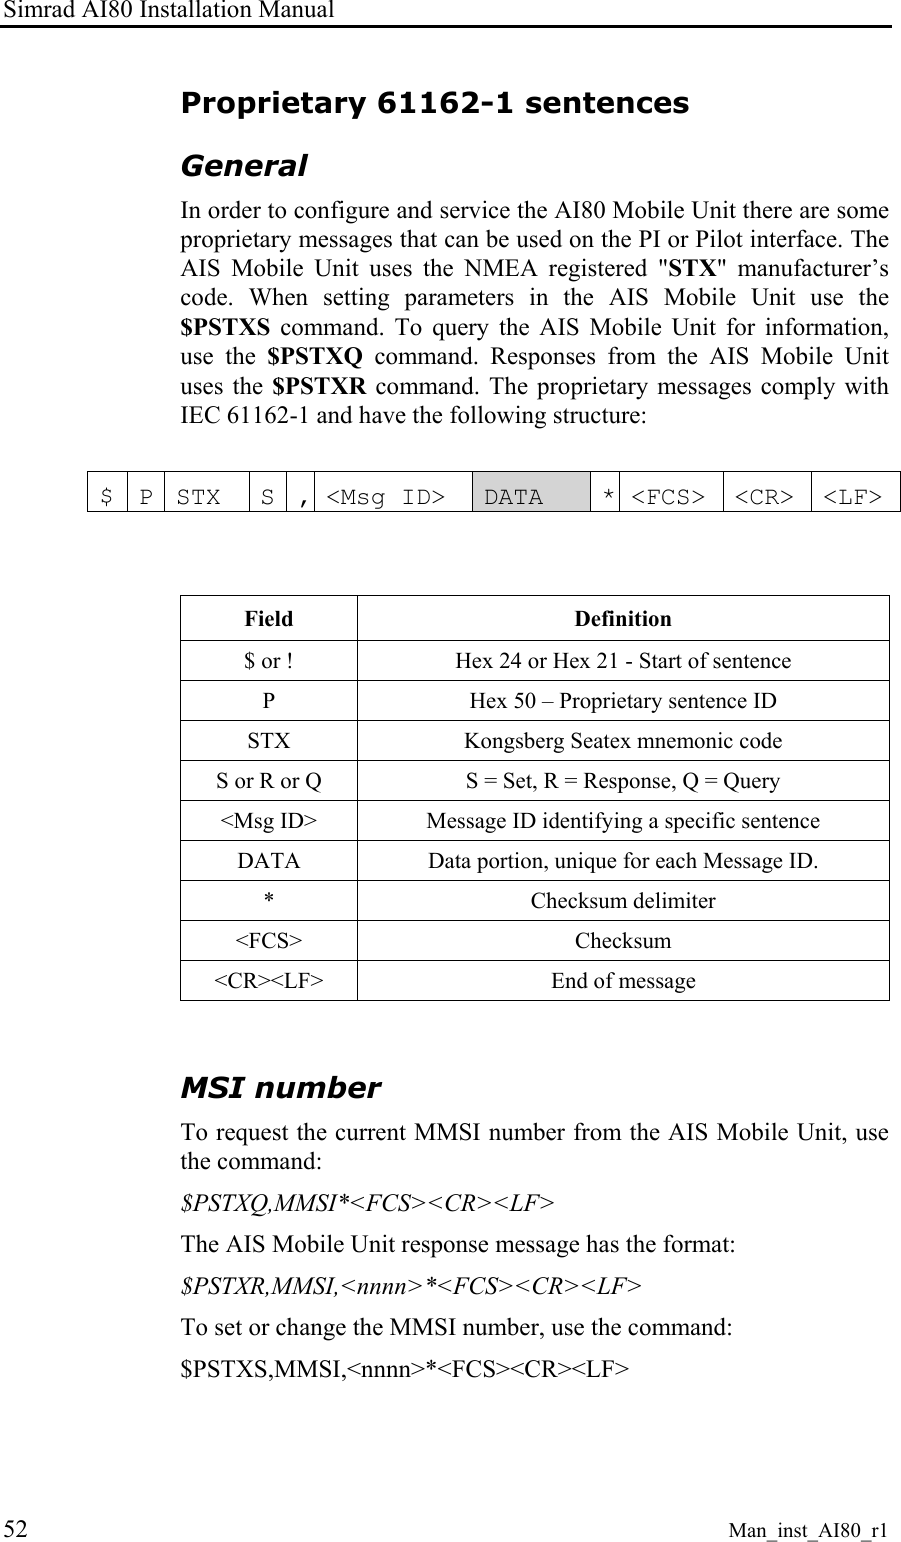 Simrad AI80 Installation Manual 52 Man_inst_AI80_r1 Proprietary 61162-1 sentences General In order to configure and service the AI80 Mobile Unit there are some proprietary messages that can be used on the PI or Pilot interface. The AIS Mobile Unit uses the NMEA registered &quot;STX&quot; manufacturer’s code. When setting parameters in the AIS Mobile Unit use the $PSTXS command. To query the AIS Mobile Unit for information, use the $PSTXQ command. Responses from the AIS Mobile Unit uses the $PSTXR command. The proprietary messages comply with IEC 61162-1 and have the following structure:  $ P STX  S , &lt;Msg ID&gt;  DATA  * &lt;FCS&gt; &lt;CR&gt; &lt;LF&gt;   Field  Definition $ or !  Hex 24 or Hex 21 - Start of sentence P  Hex 50 – Proprietary sentence ID STX  Kongsberg Seatex mnemonic code S or R or Q  S = Set, R = Response, Q = Query &lt;Msg ID&gt;  Message ID identifying a specific sentence DATA  Data portion, unique for each Message ID. * Checksum delimiter &lt;FCS&gt; Checksum &lt;CR&gt;&lt;LF&gt;  End of message  MSI number To request the current MMSI number from the AIS Mobile Unit, use the command: $PSTXQ,MMSI*&lt;FCS&gt;&lt;CR&gt;&lt;LF&gt; The AIS Mobile Unit response message has the format: $PSTXR,MMSI,&lt;nnnn&gt;*&lt;FCS&gt;&lt;CR&gt;&lt;LF&gt; To set or change the MMSI number, use the command: $PSTXS,MMSI,&lt;nnnn&gt;*&lt;FCS&gt;&lt;CR&gt;&lt;LF&gt;  